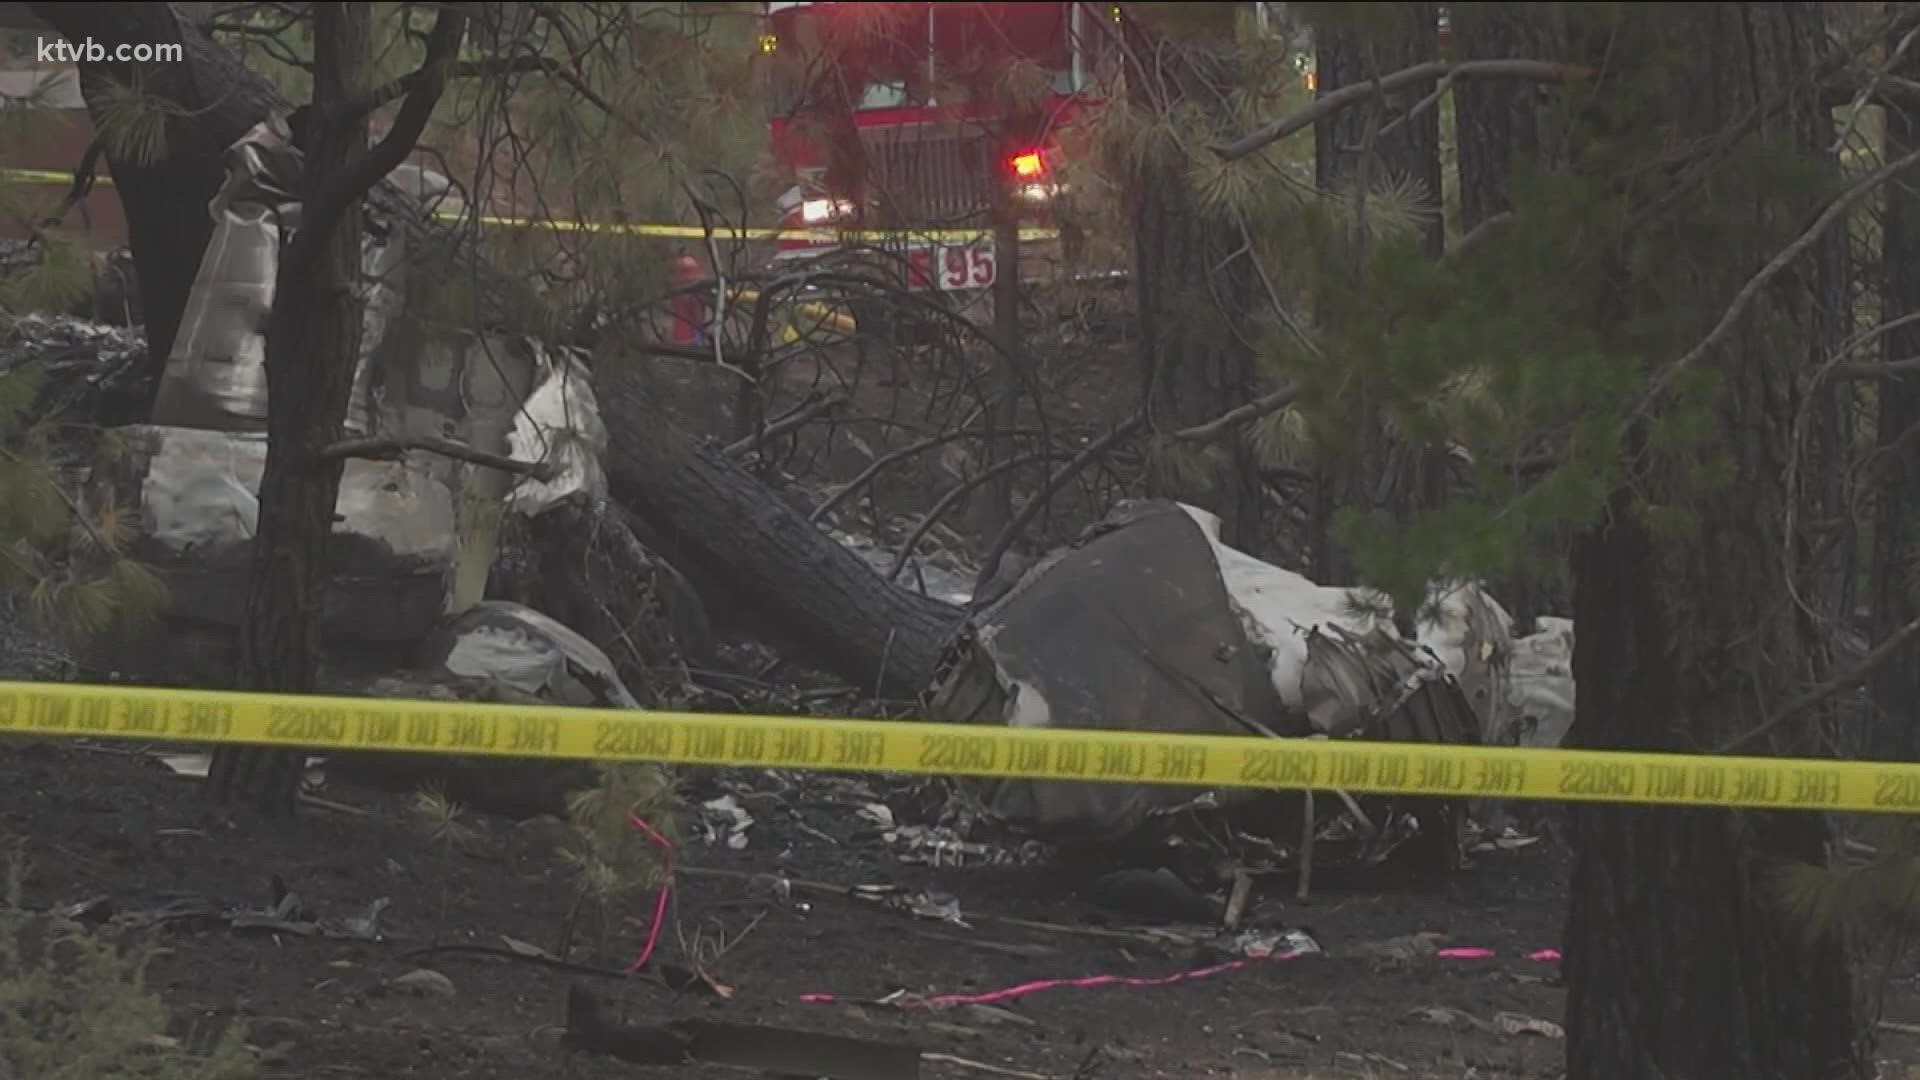 Authorities now say that all six people on the plane died in the crash. The plane originated from Coeur d'Alene, Idaho, officials say.